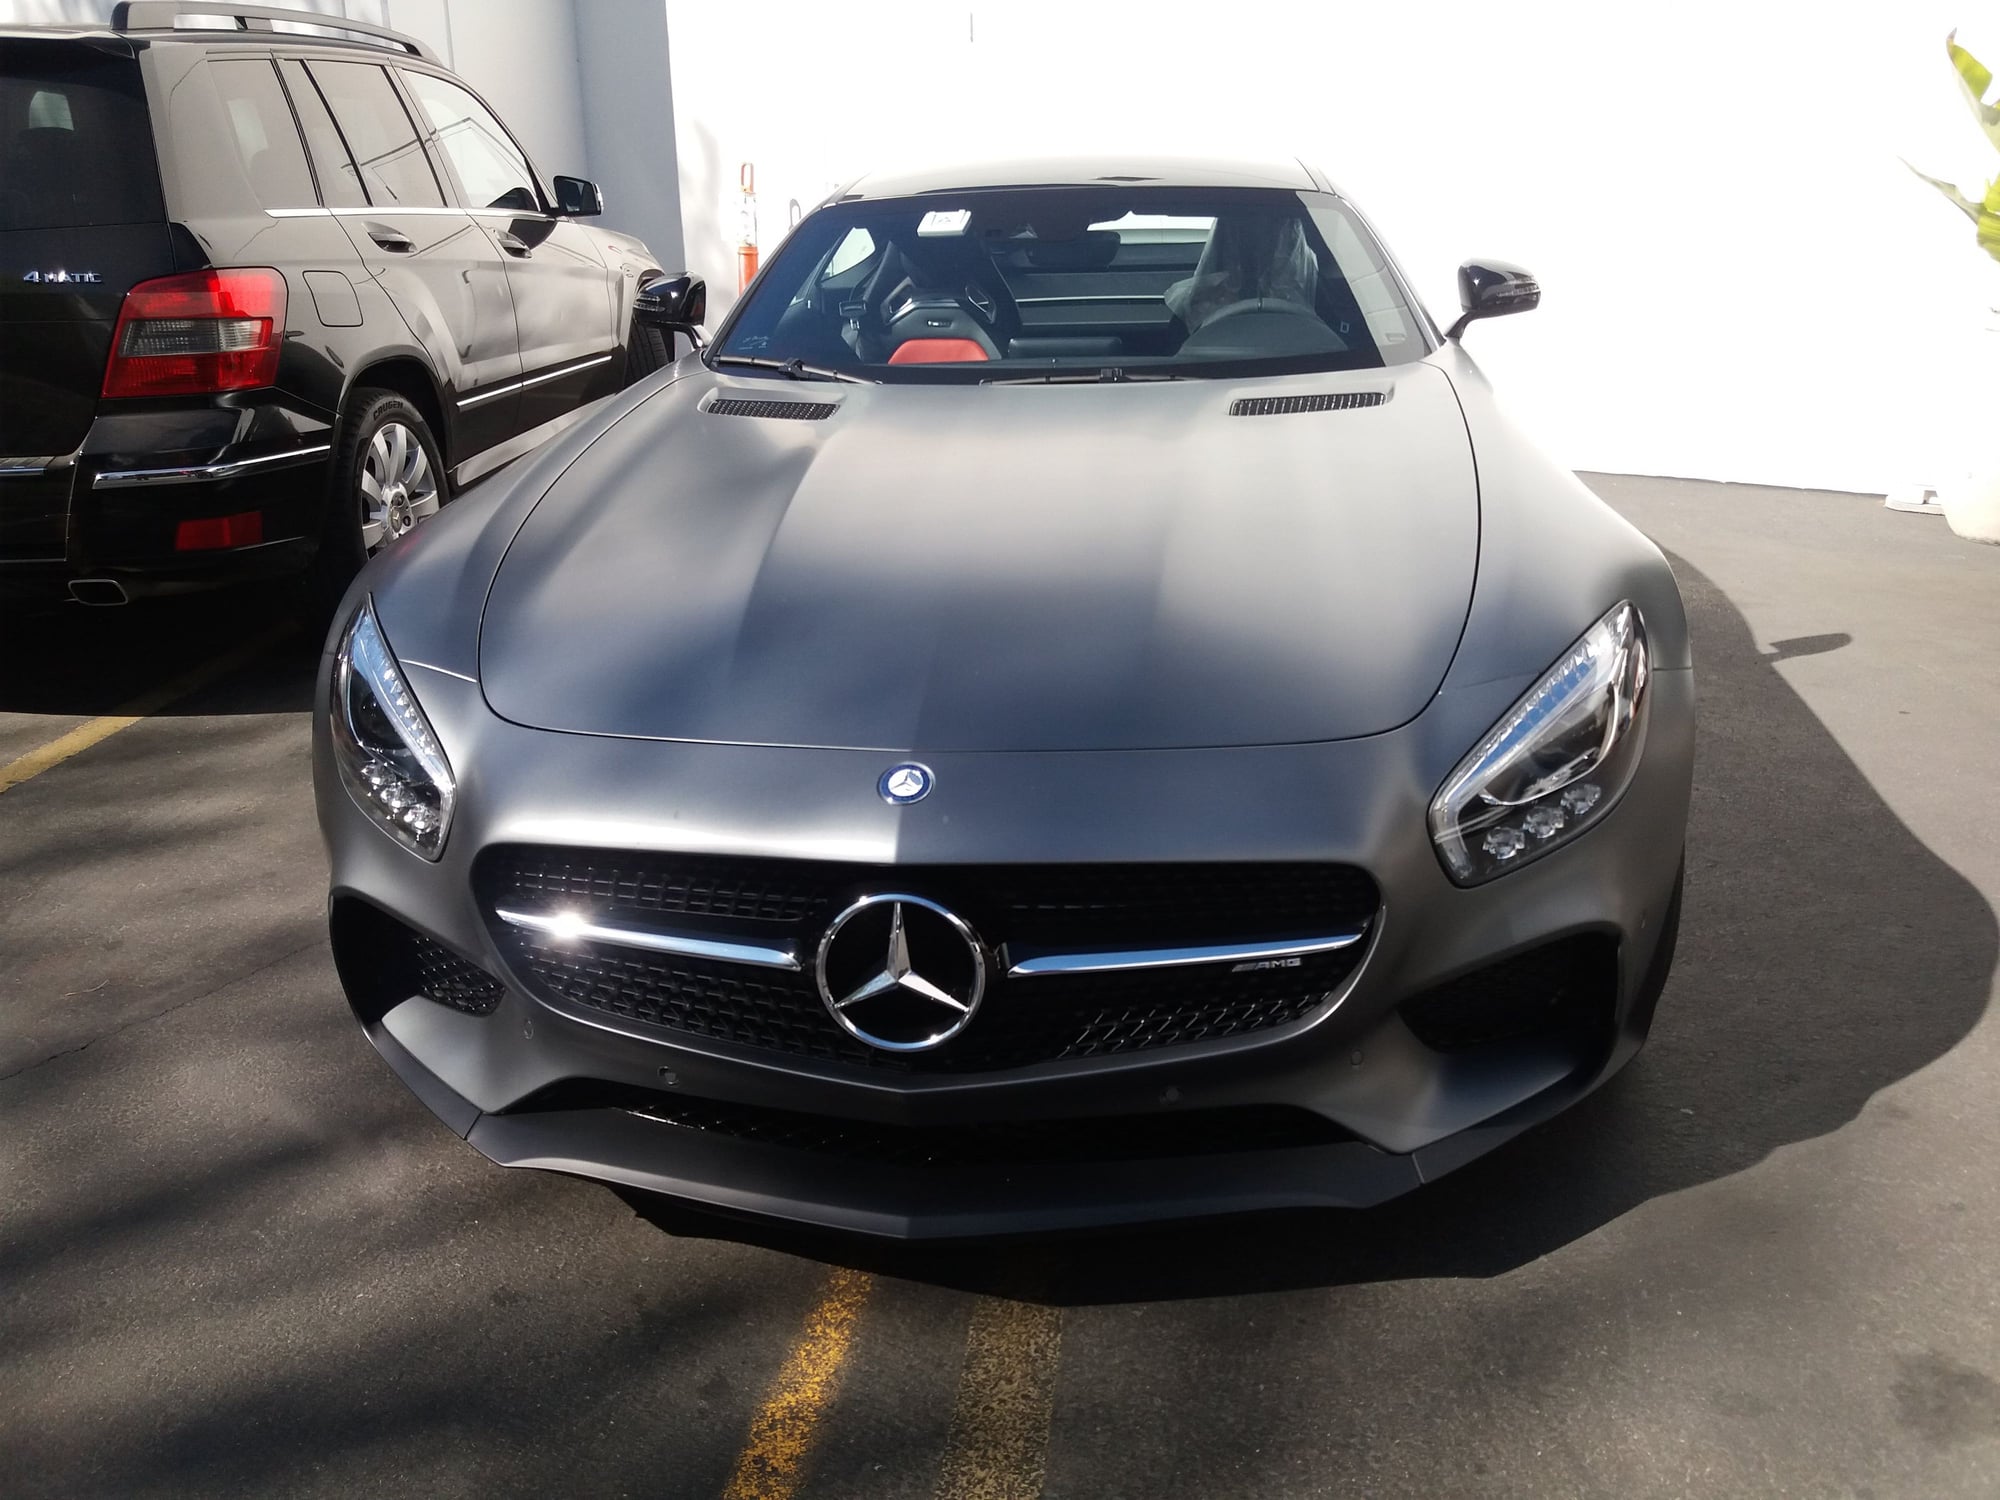 2017 Mercedes-Benz AMG GT S - Almost new GTS looking for a new home - Used - VIN WDDYJ7JAXHA010045 - 5,900 Miles - 8 cyl - 2WD - Automatic - Coupe - Gray - Oakland, CA 94611, United States